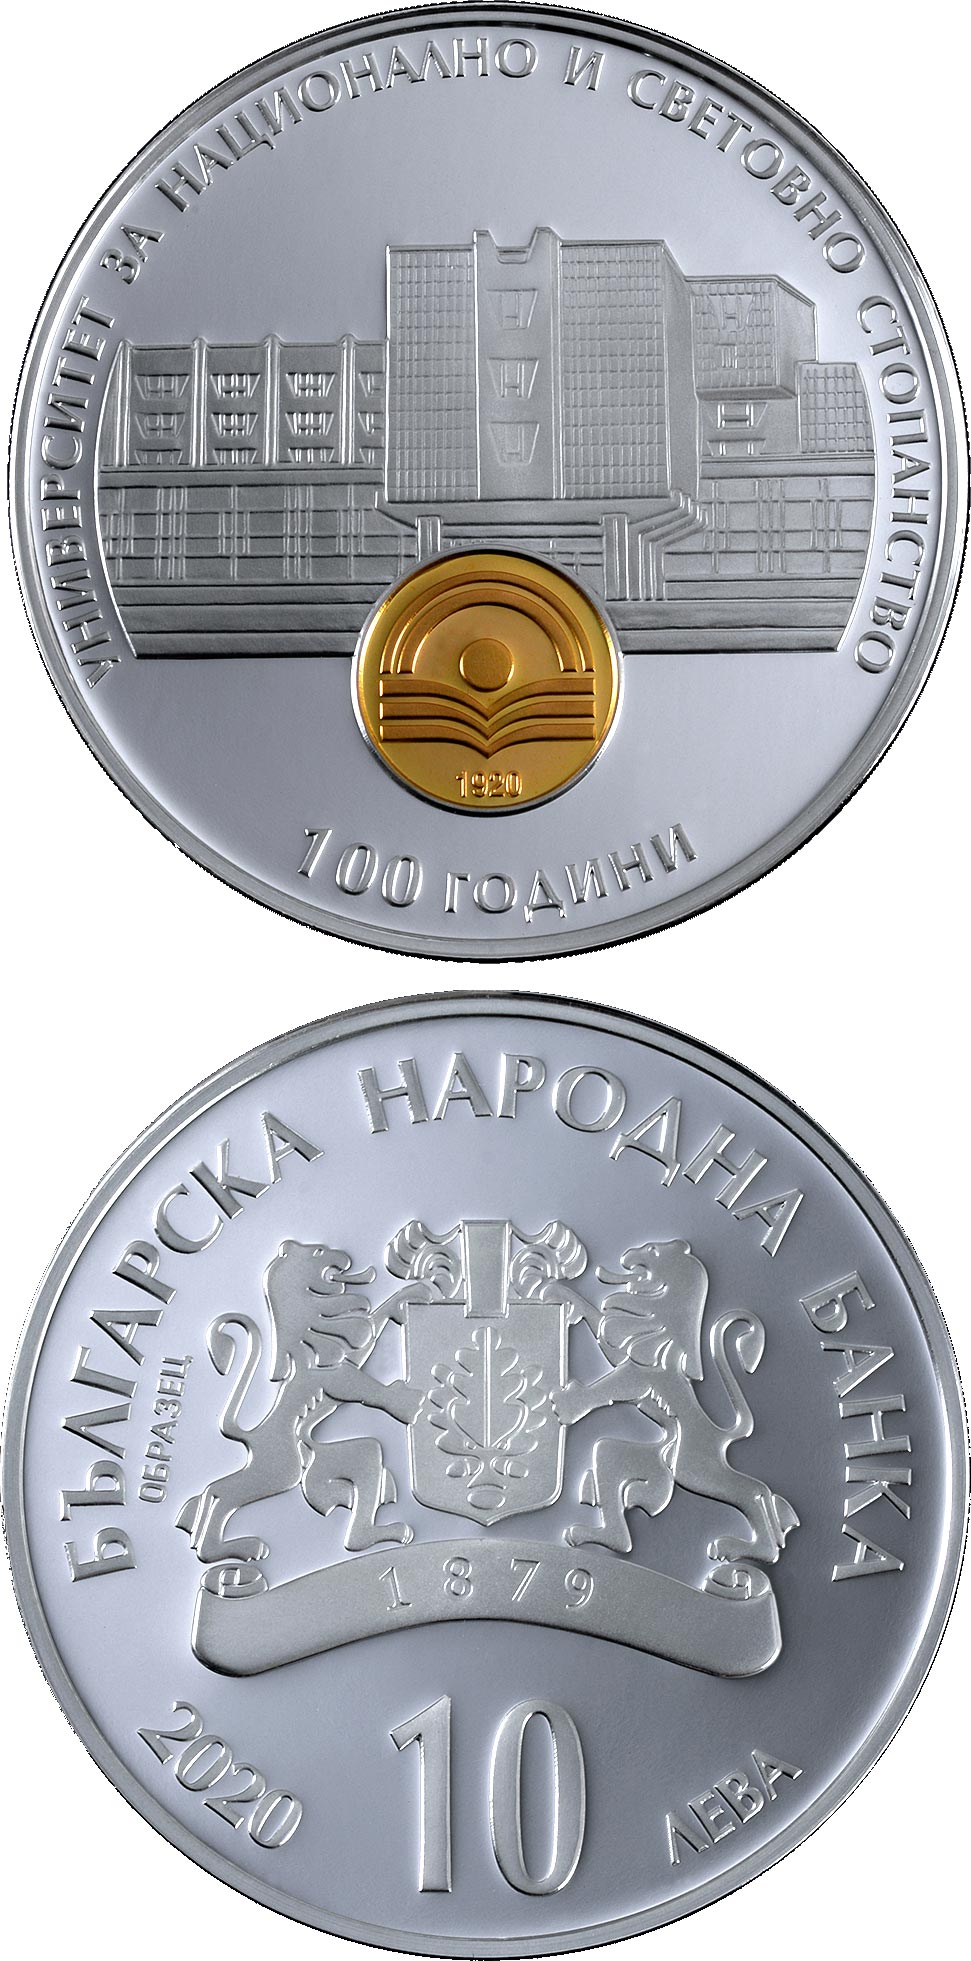 Image of 10 lev  coin - 100 Years of University of National and World Economy | Bulgaria 2020.  The Bimetal: gold, silver coin is of Proof quality.